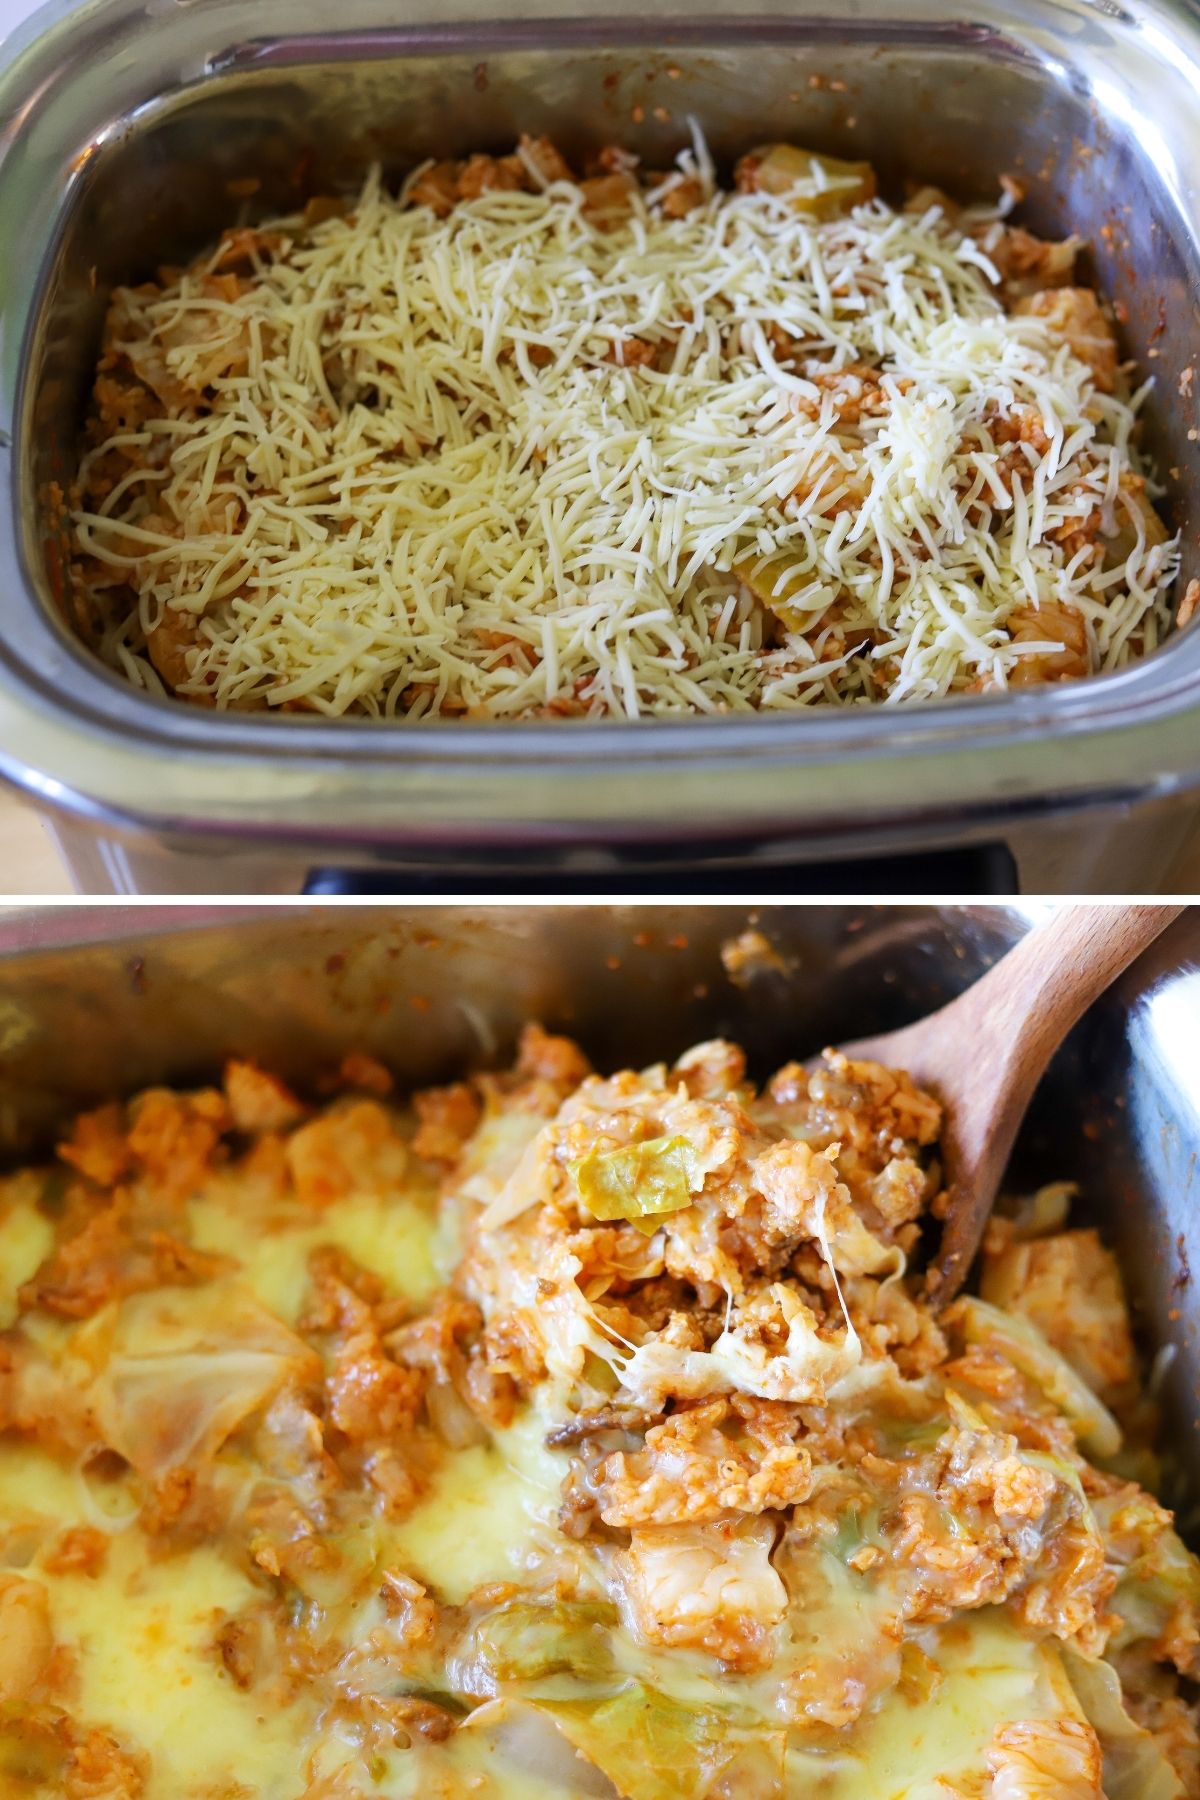 two images showing shredded cheese on a cabbage roll casserole in a crock pot before and after the cheese has melted.